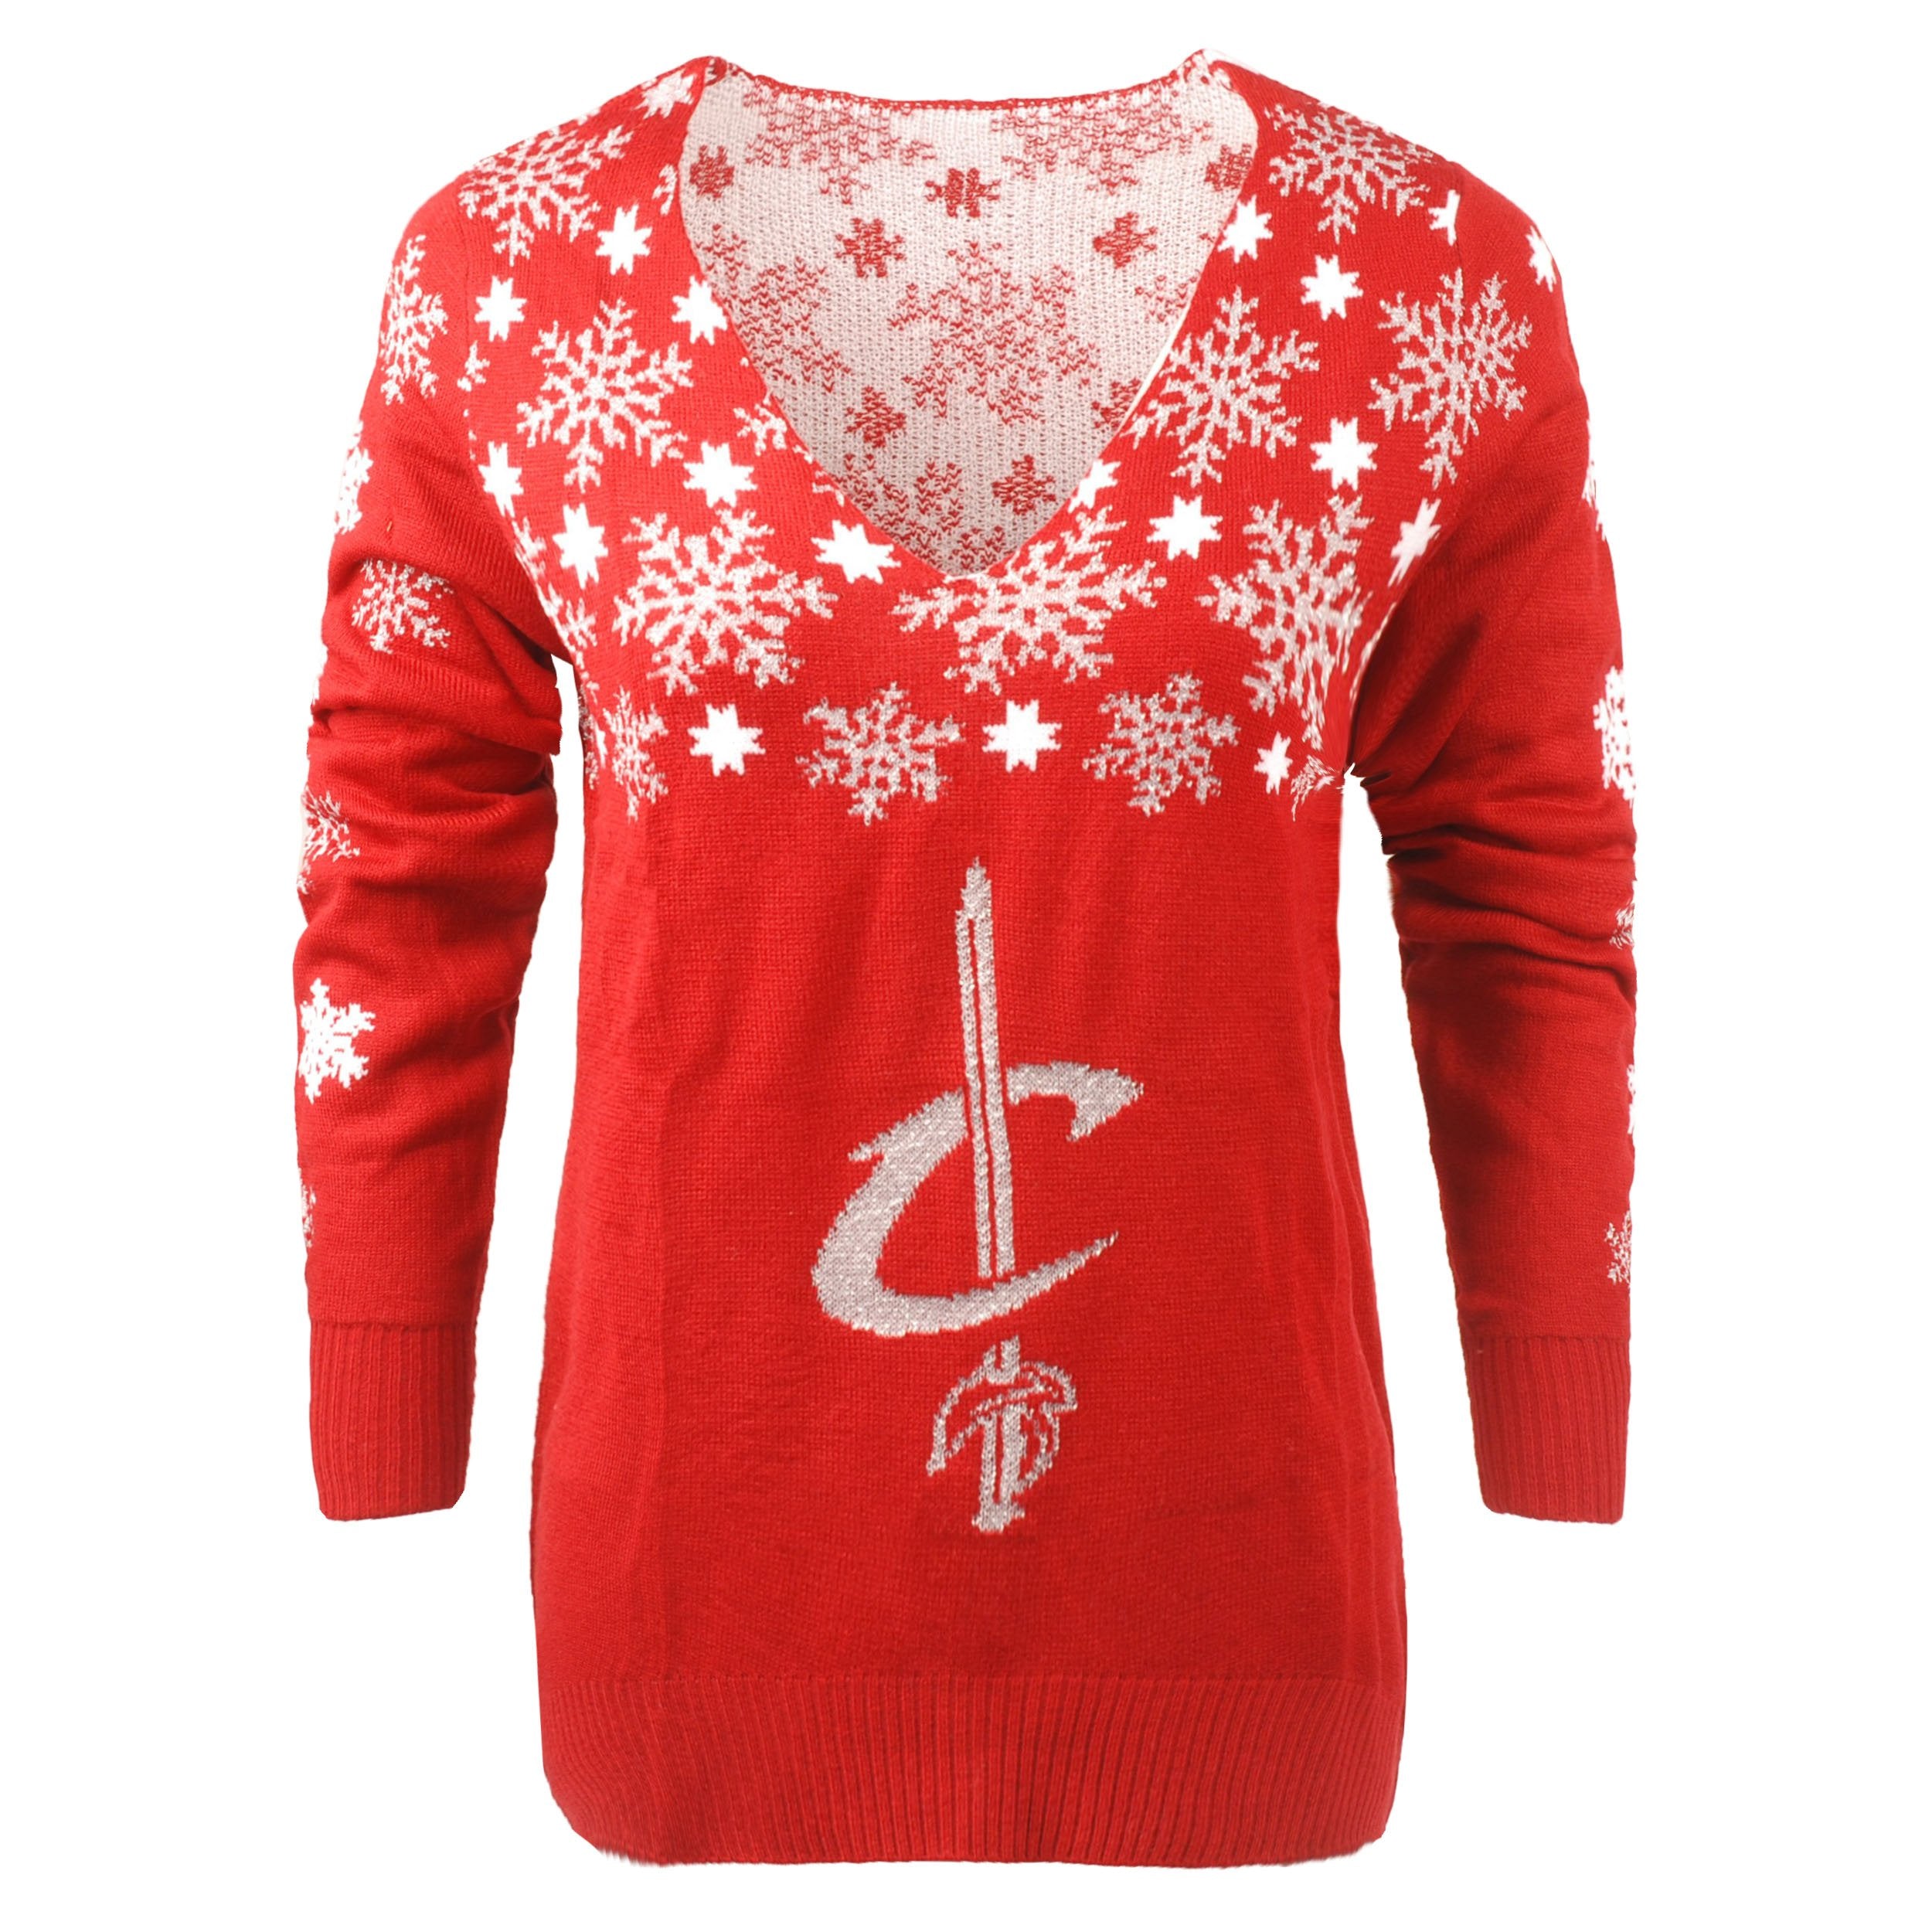 cleveland cavaliers sweater